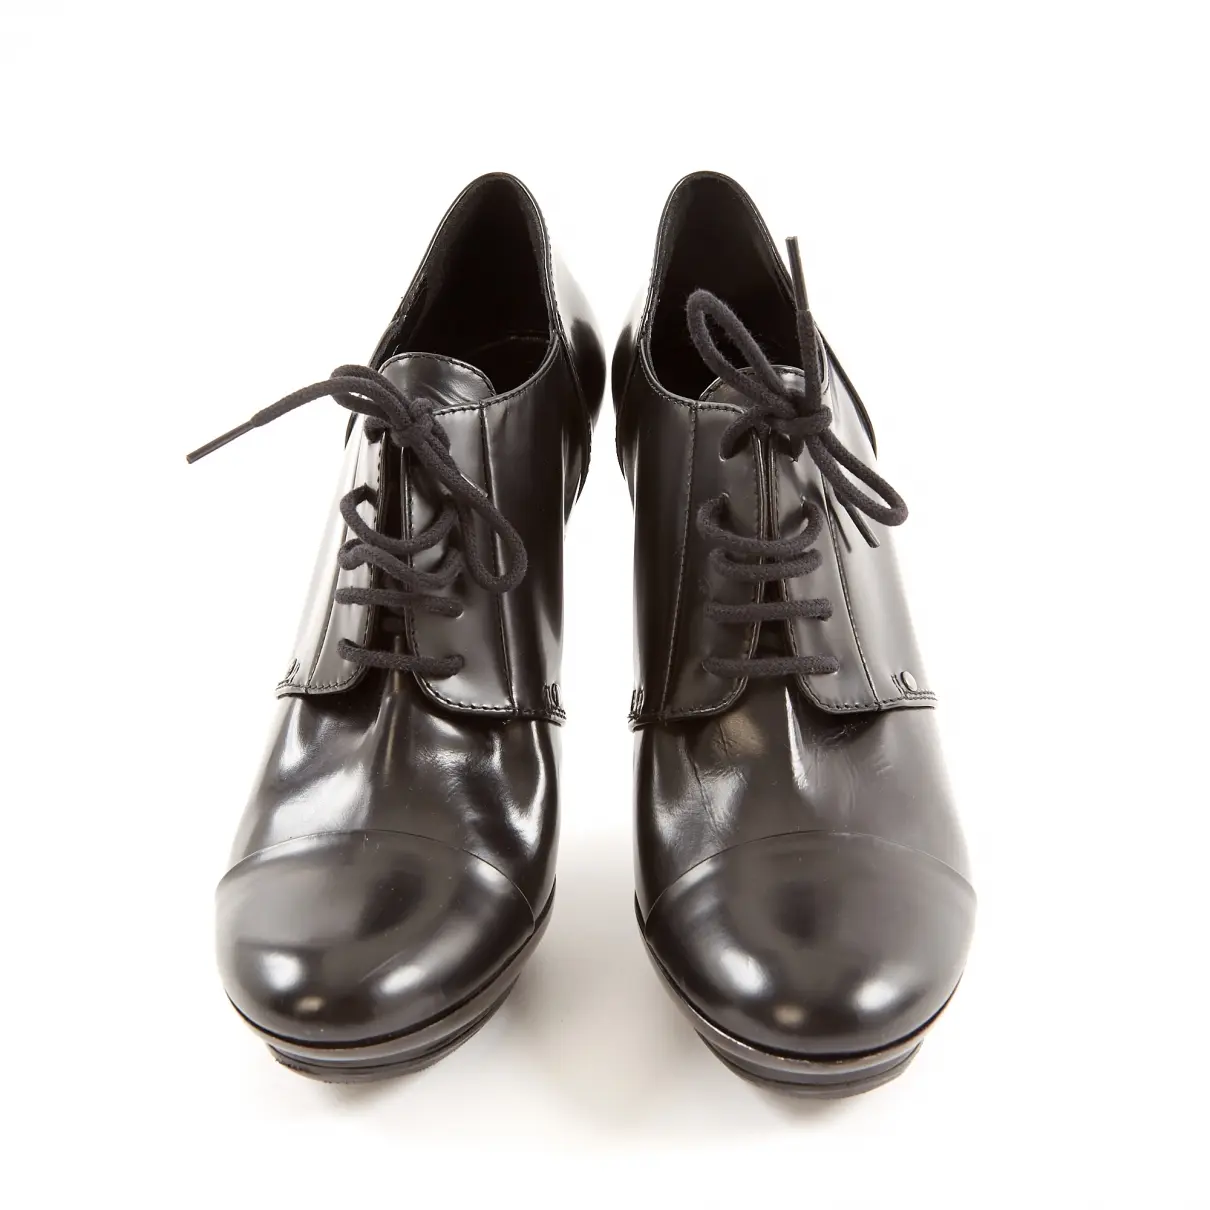 Buy Sonia Rykiel Leather lace up boots online - Vintage